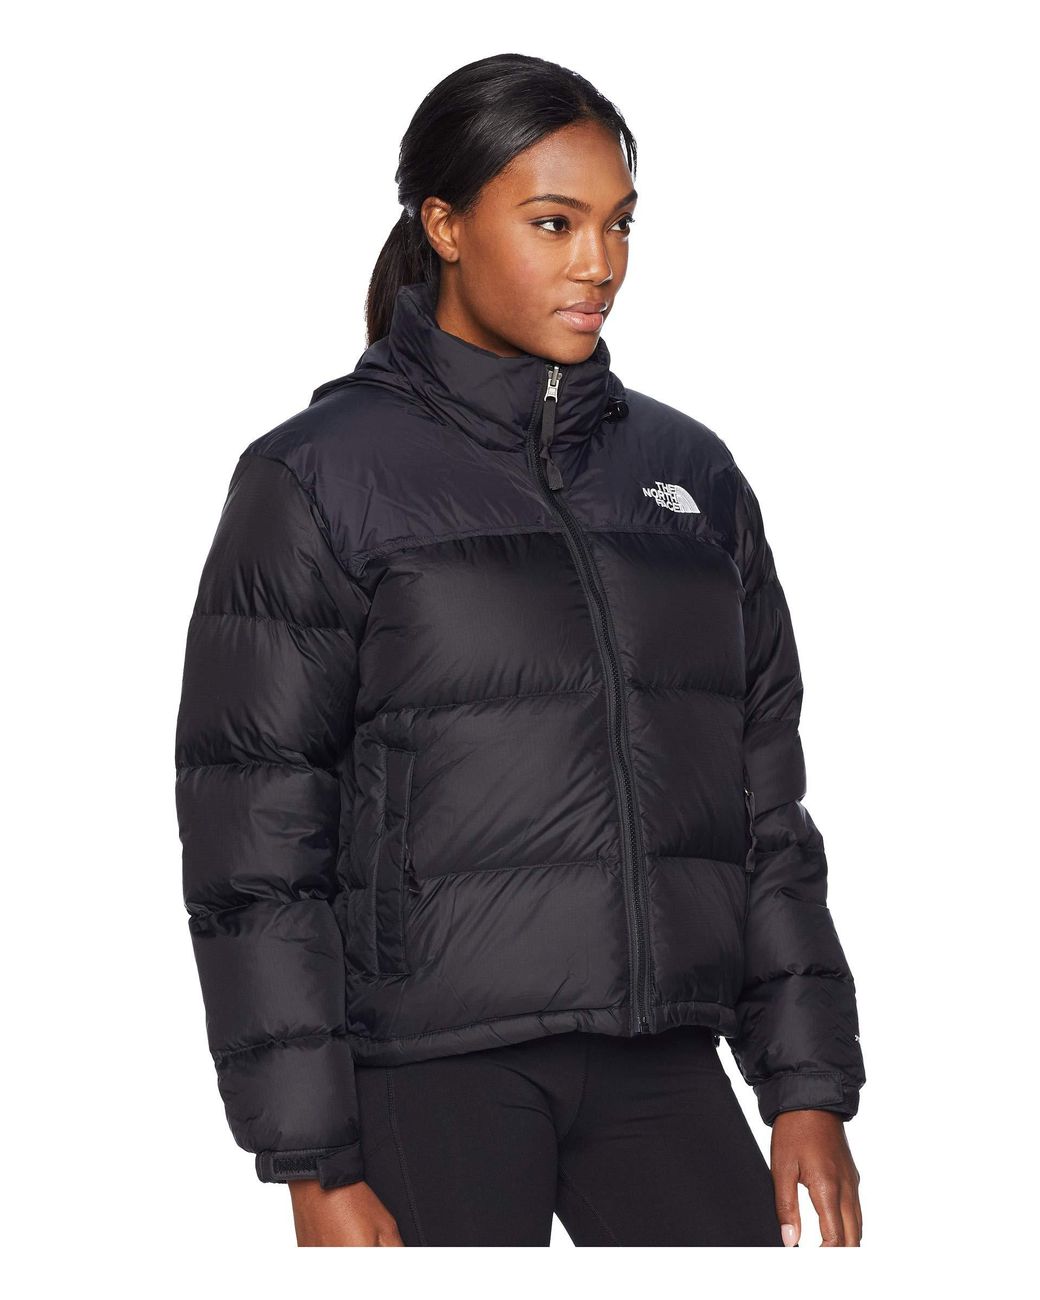 North Face Puffer Jacket 1996 Black | old.russiancouncil.ru